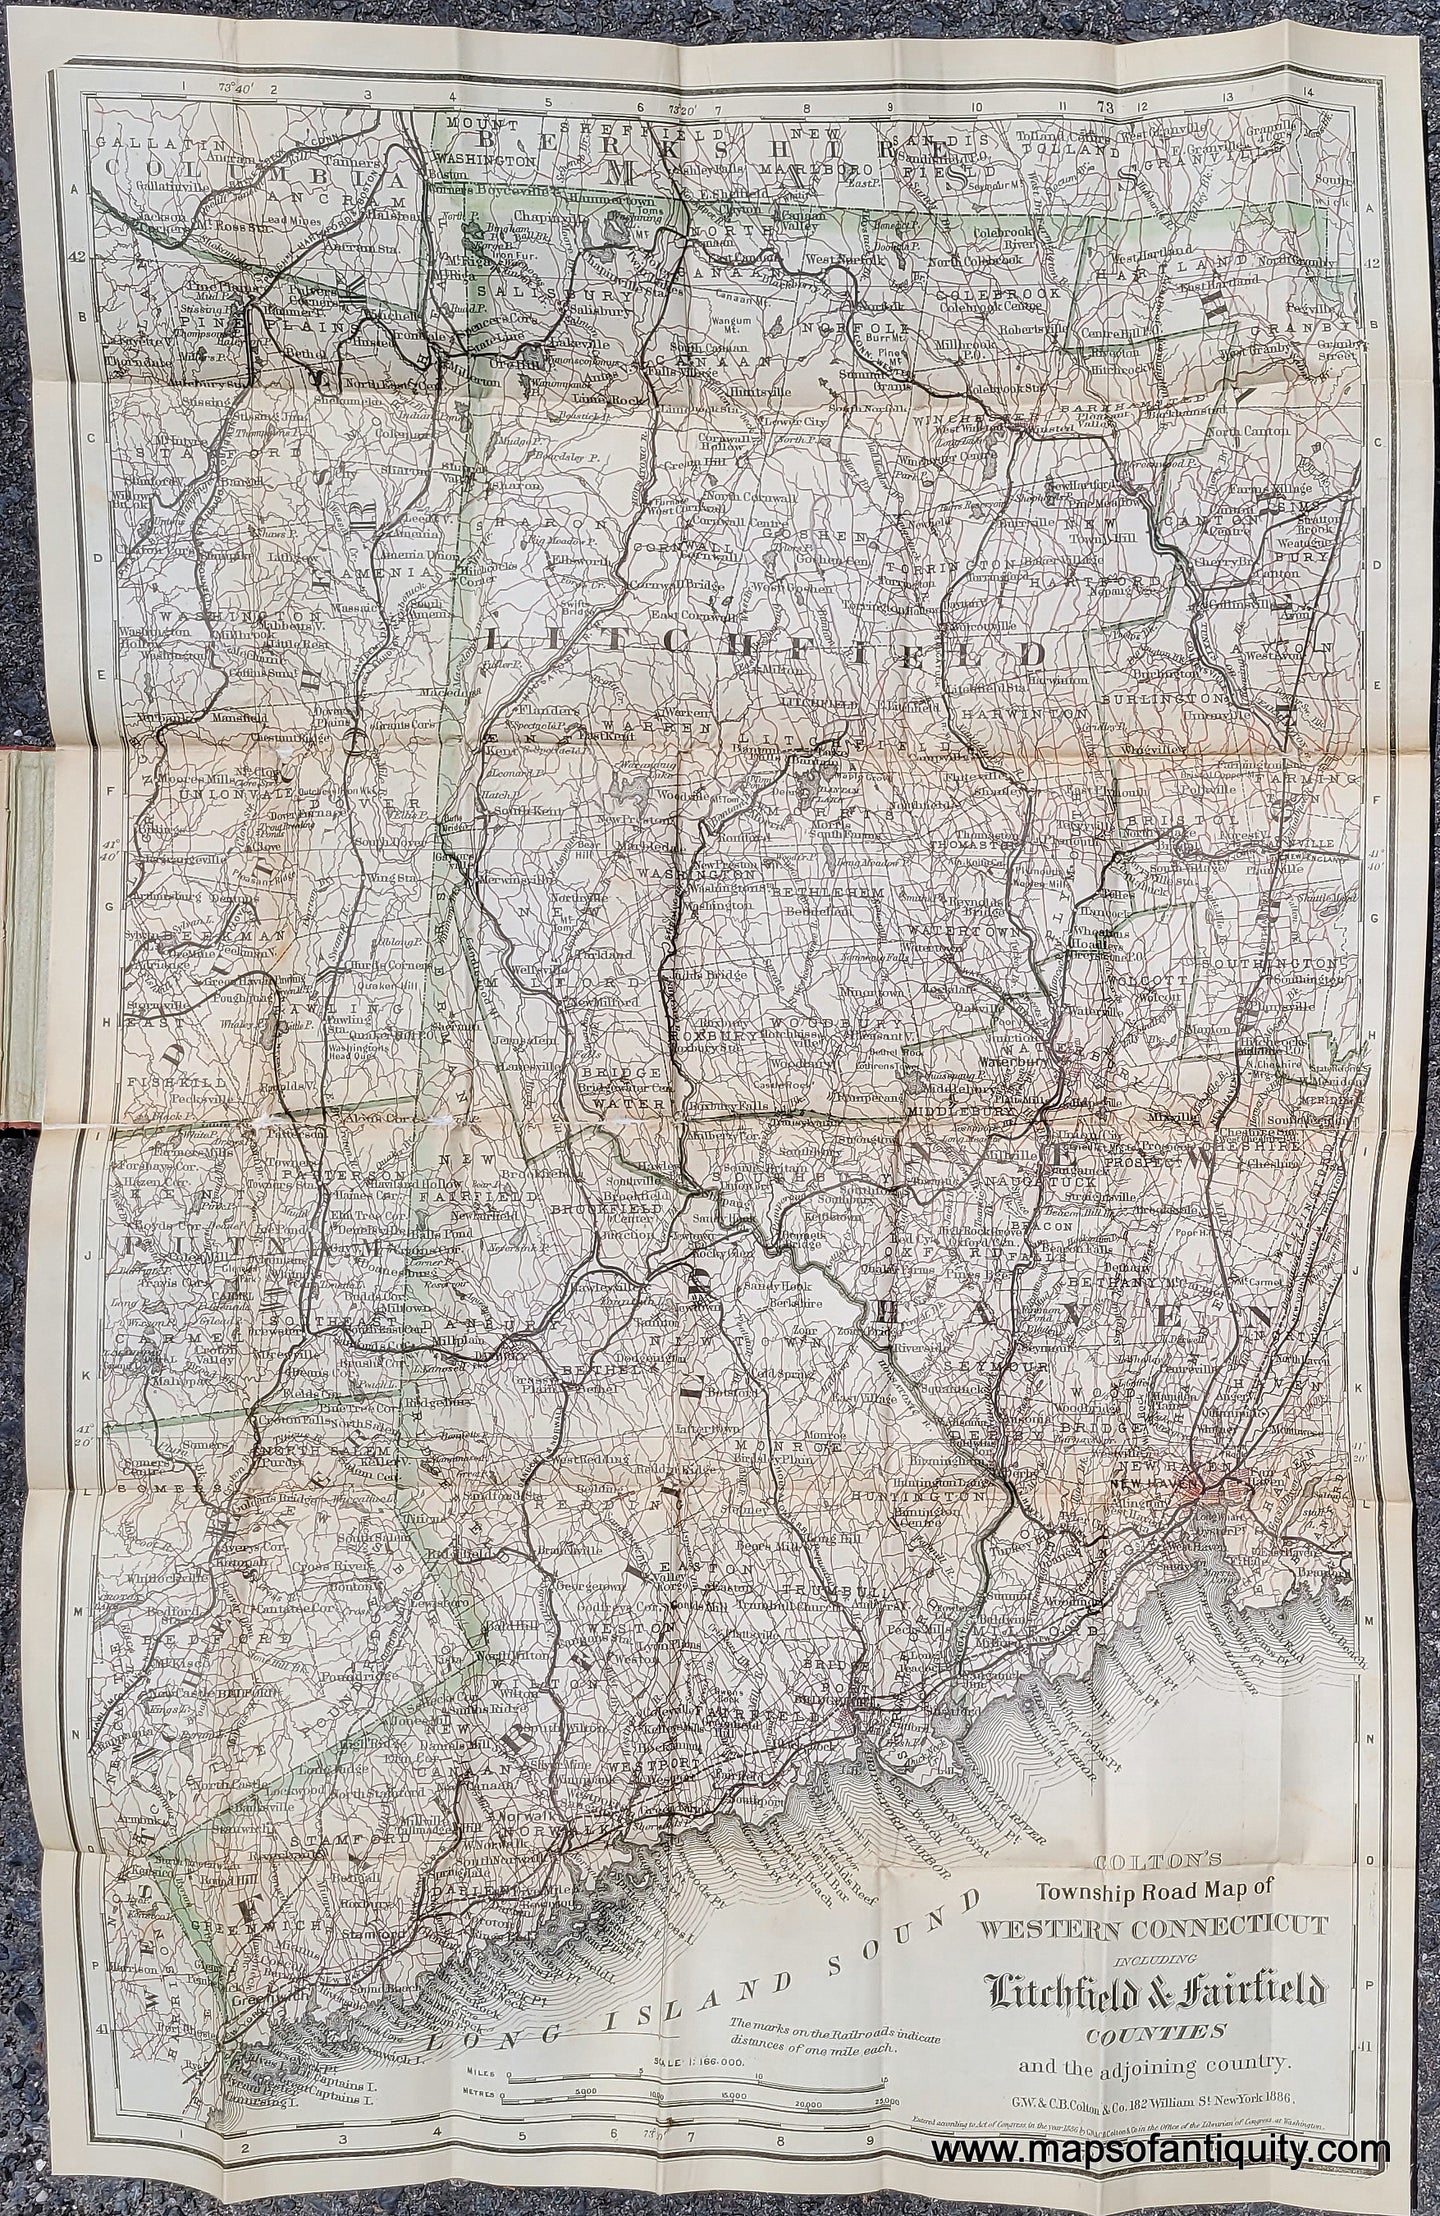 Folding map of Fairfield and Litchfield Counties in Connecticut with the surrounding areas including part of Westchester and Dutchess Counties in NY